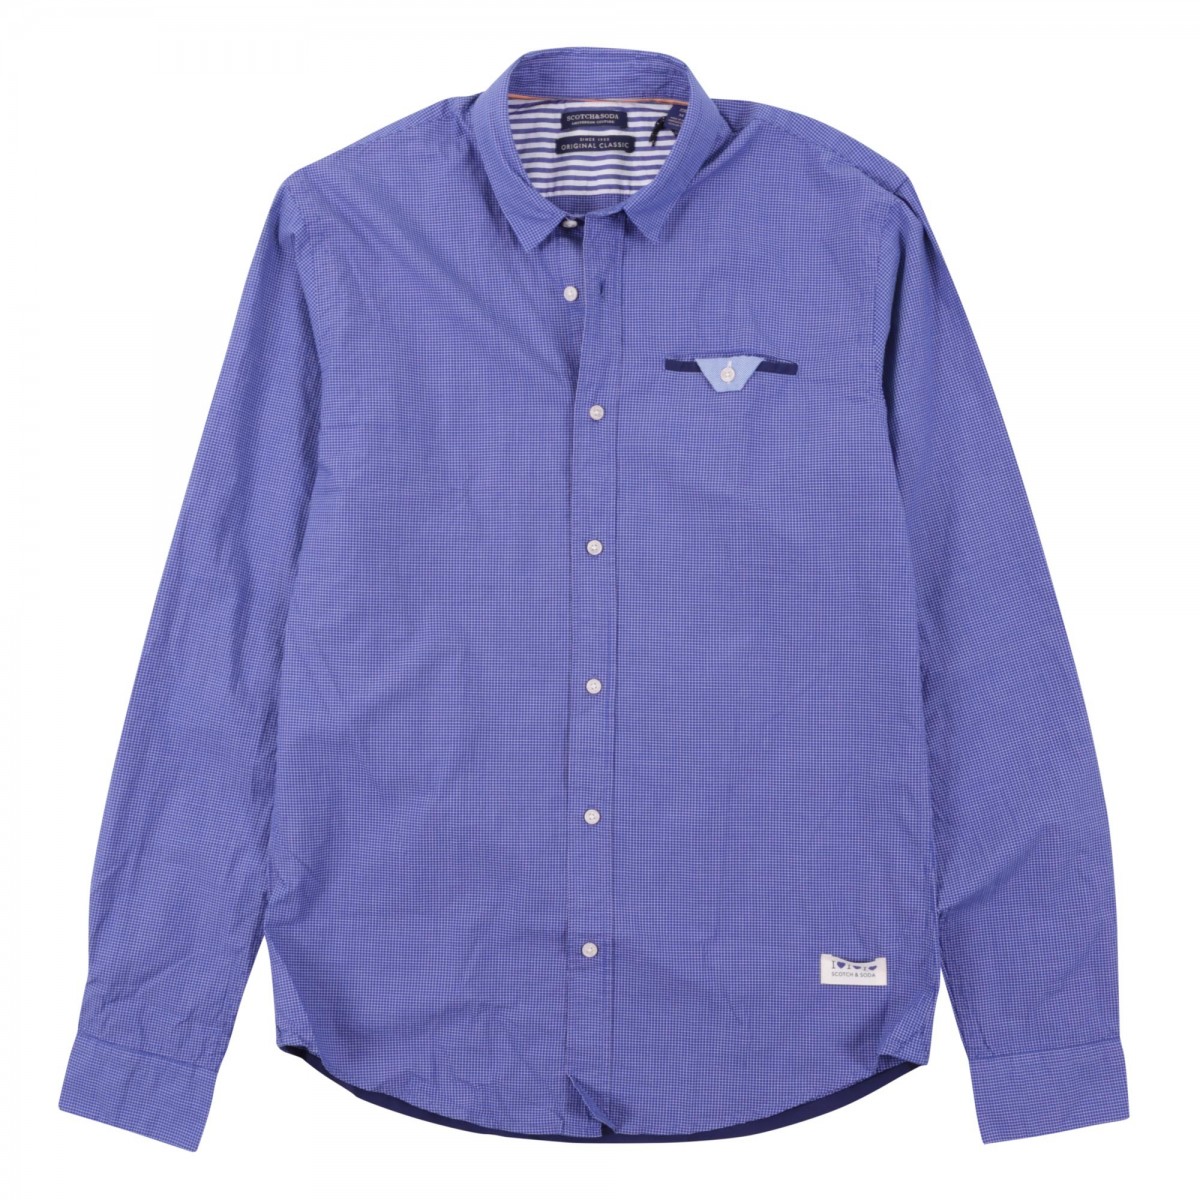 LONGSLEEVE SHIRT WITH CONTRAST